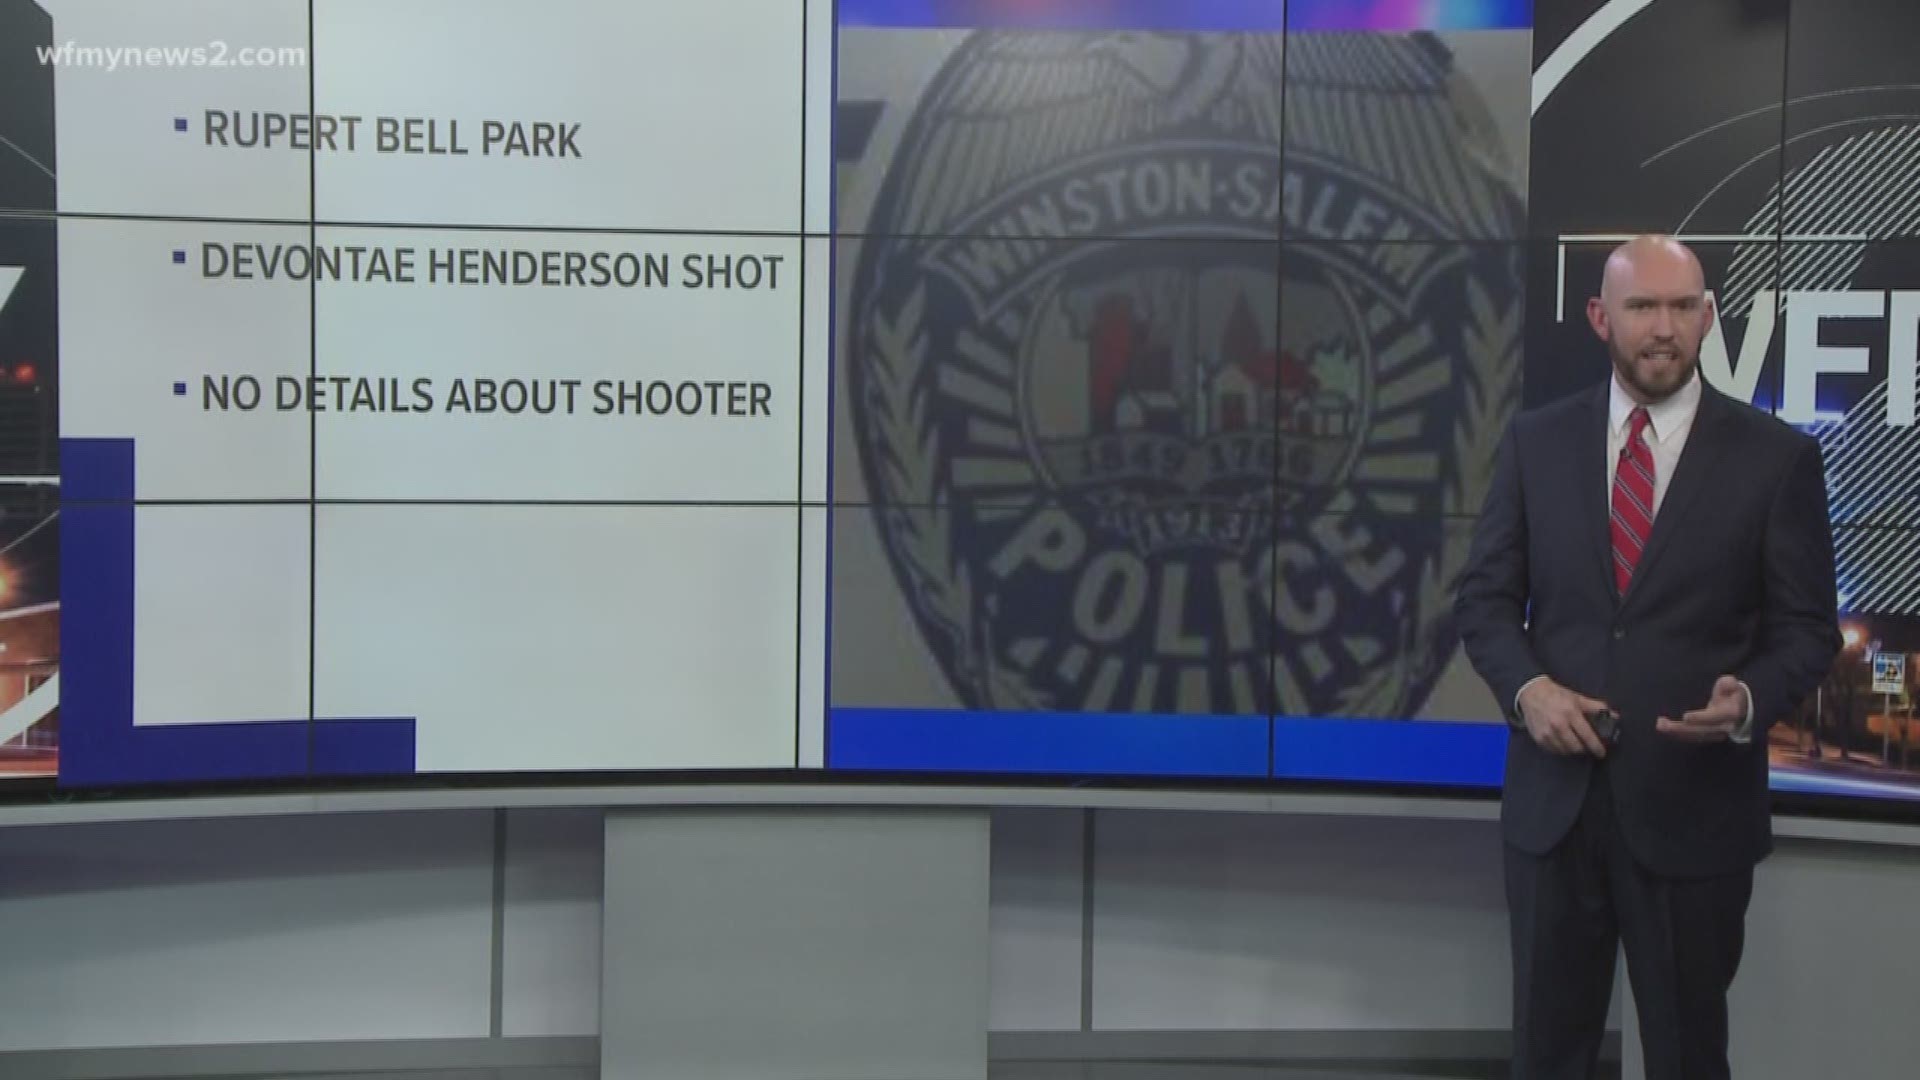 Police say a man was shot in the middle of the day at Rupert Bell Park